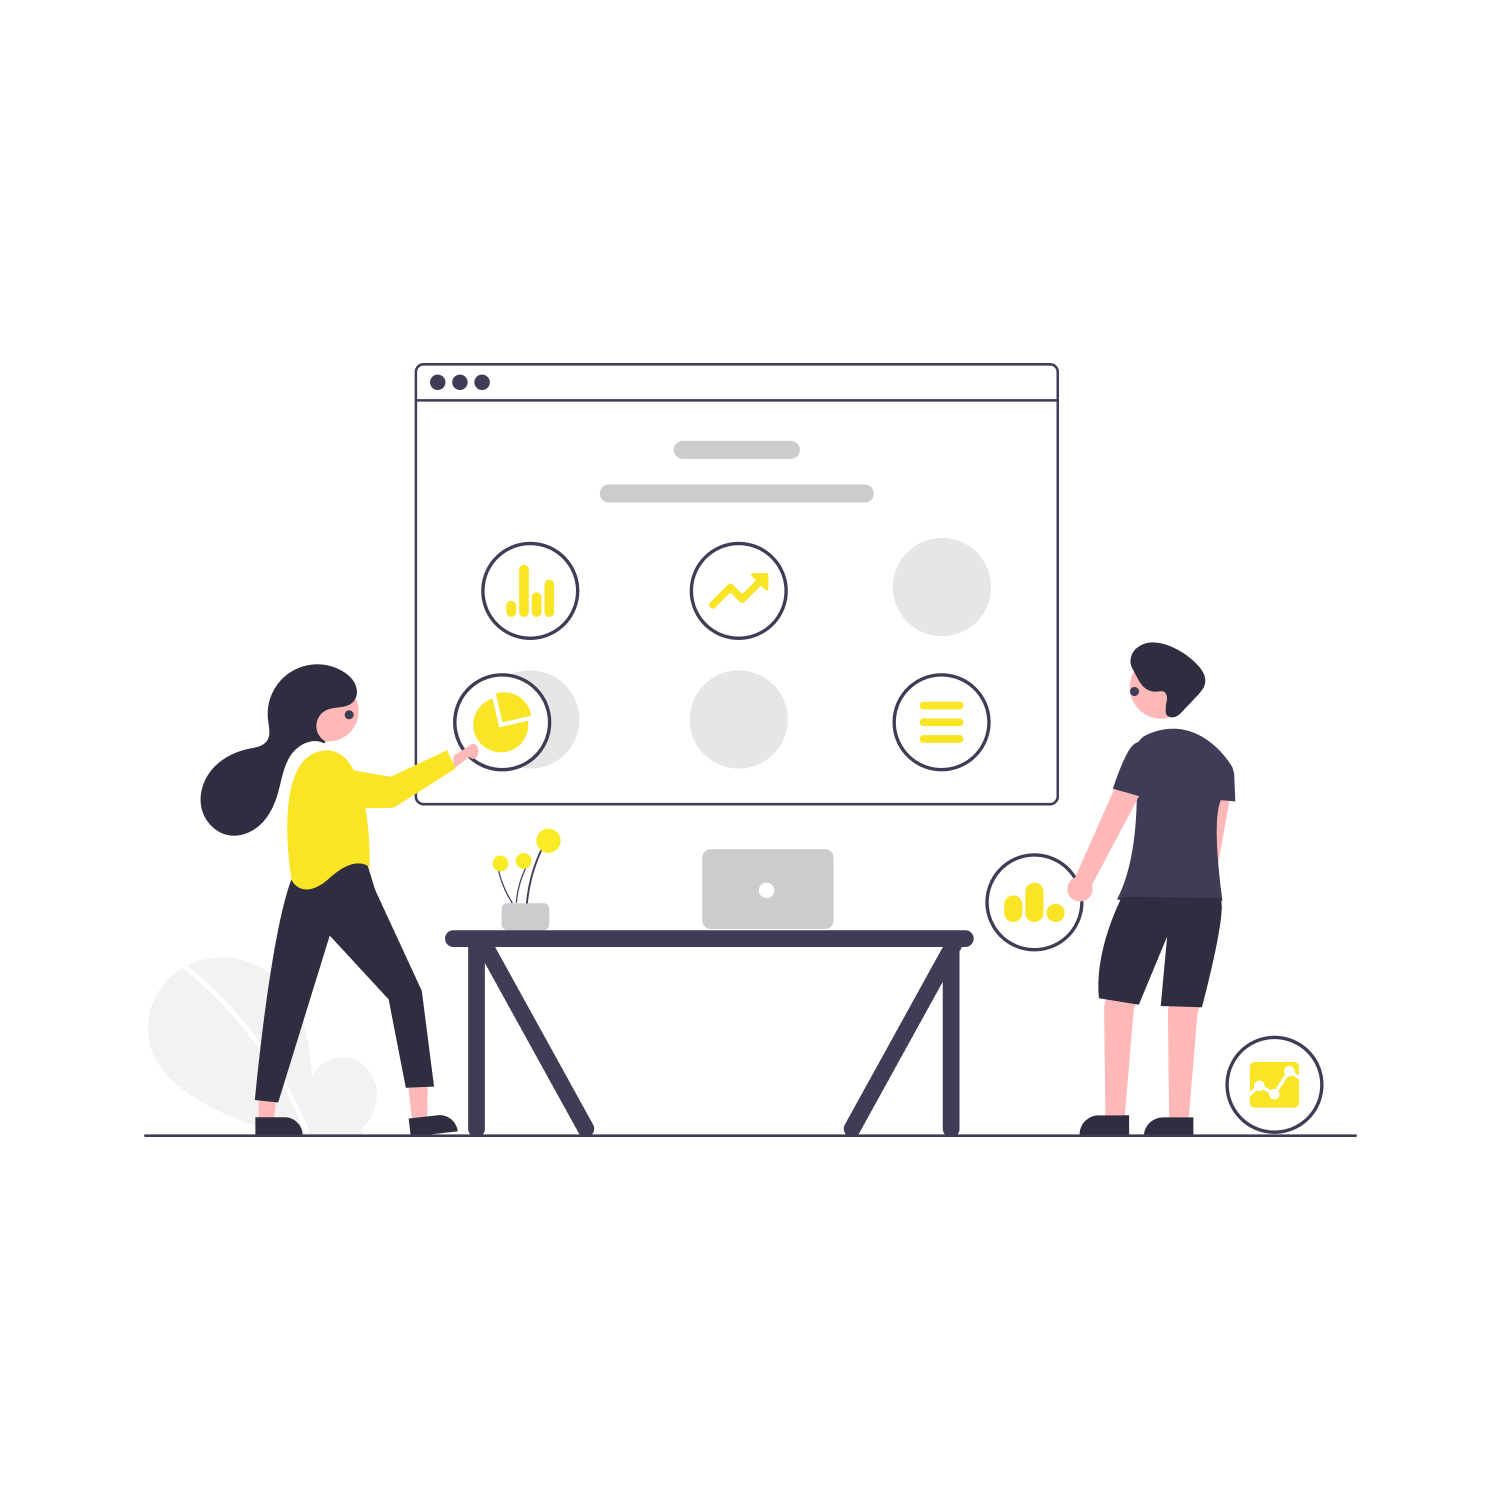 chatting-cut-packages-illustration